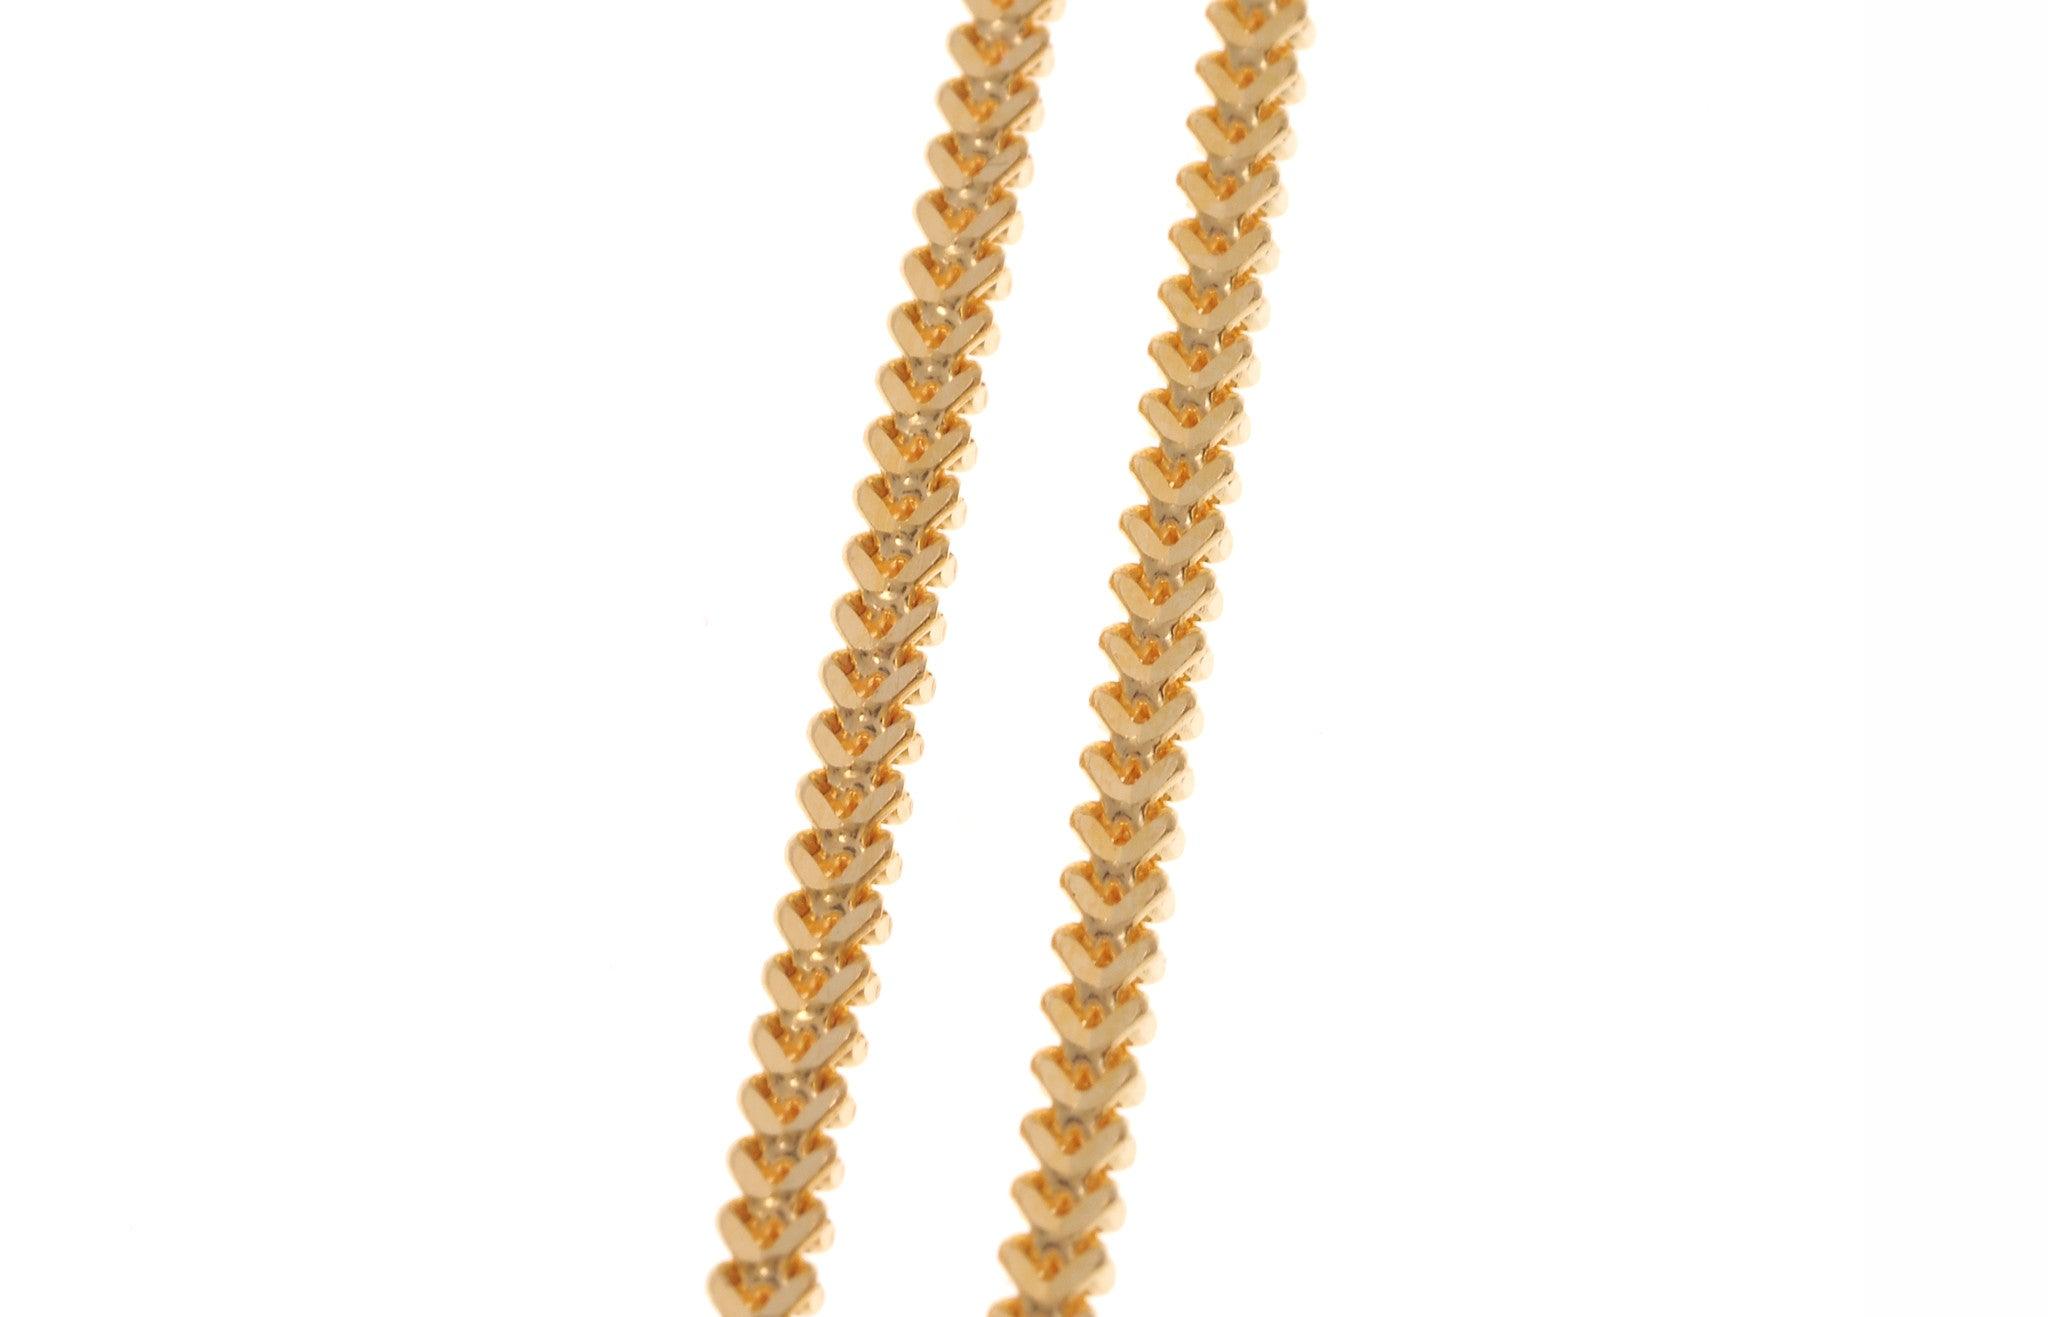 22ct Gold Unisex Foxtail Chain with a lobster clasp C-3796